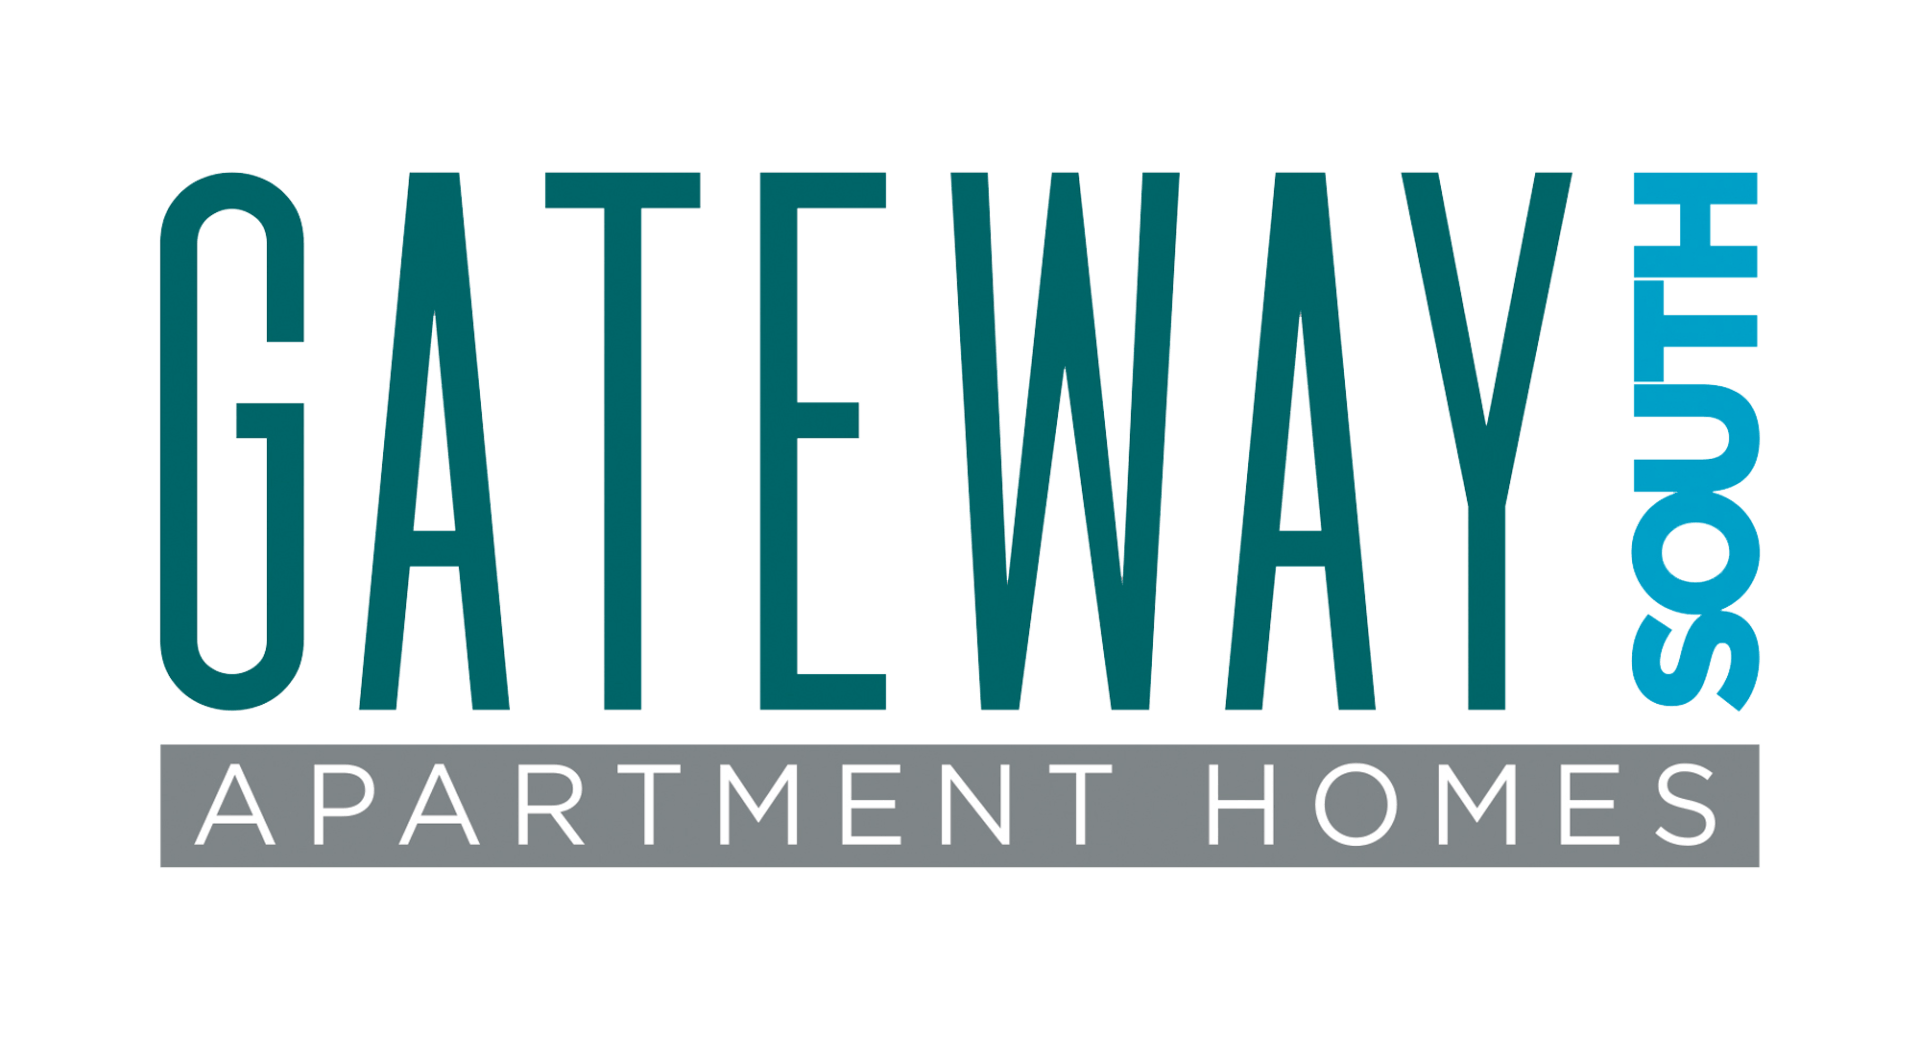 Gateway South Logo - go to home page